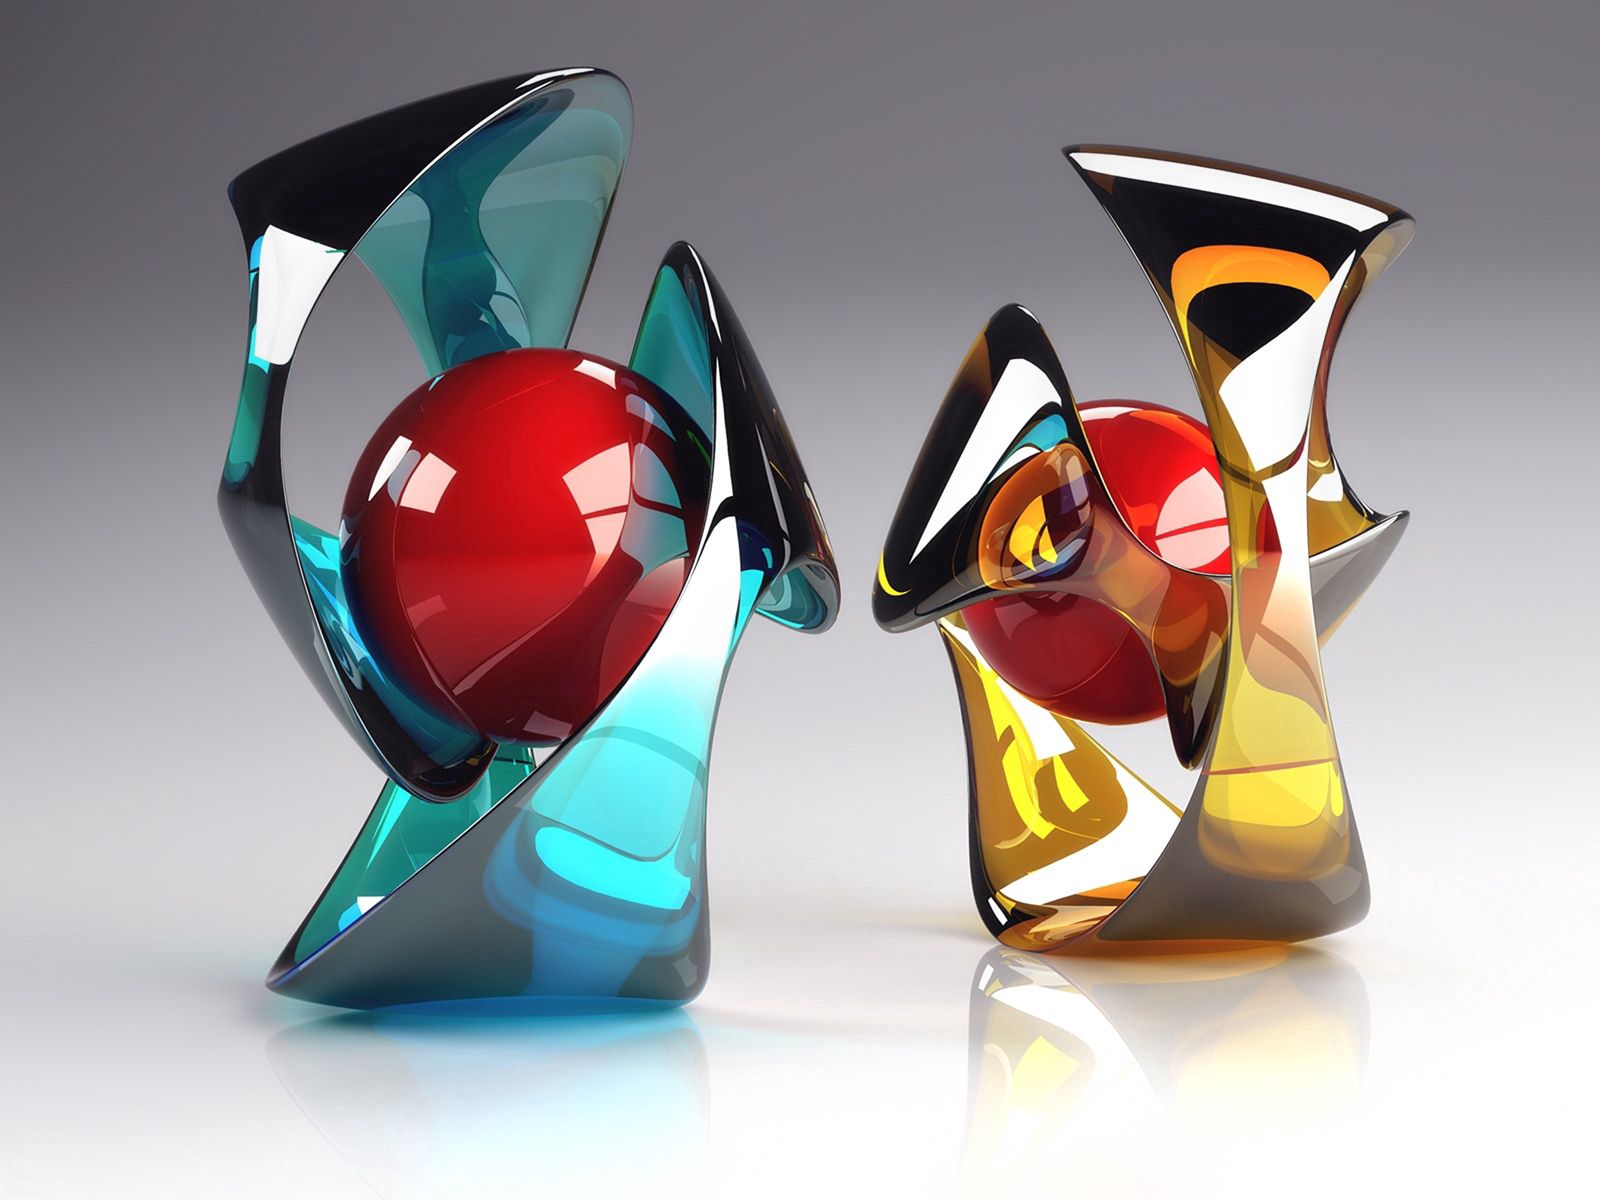 colourful, 3d, glass, ball, colorful, shapes, shape 1080p